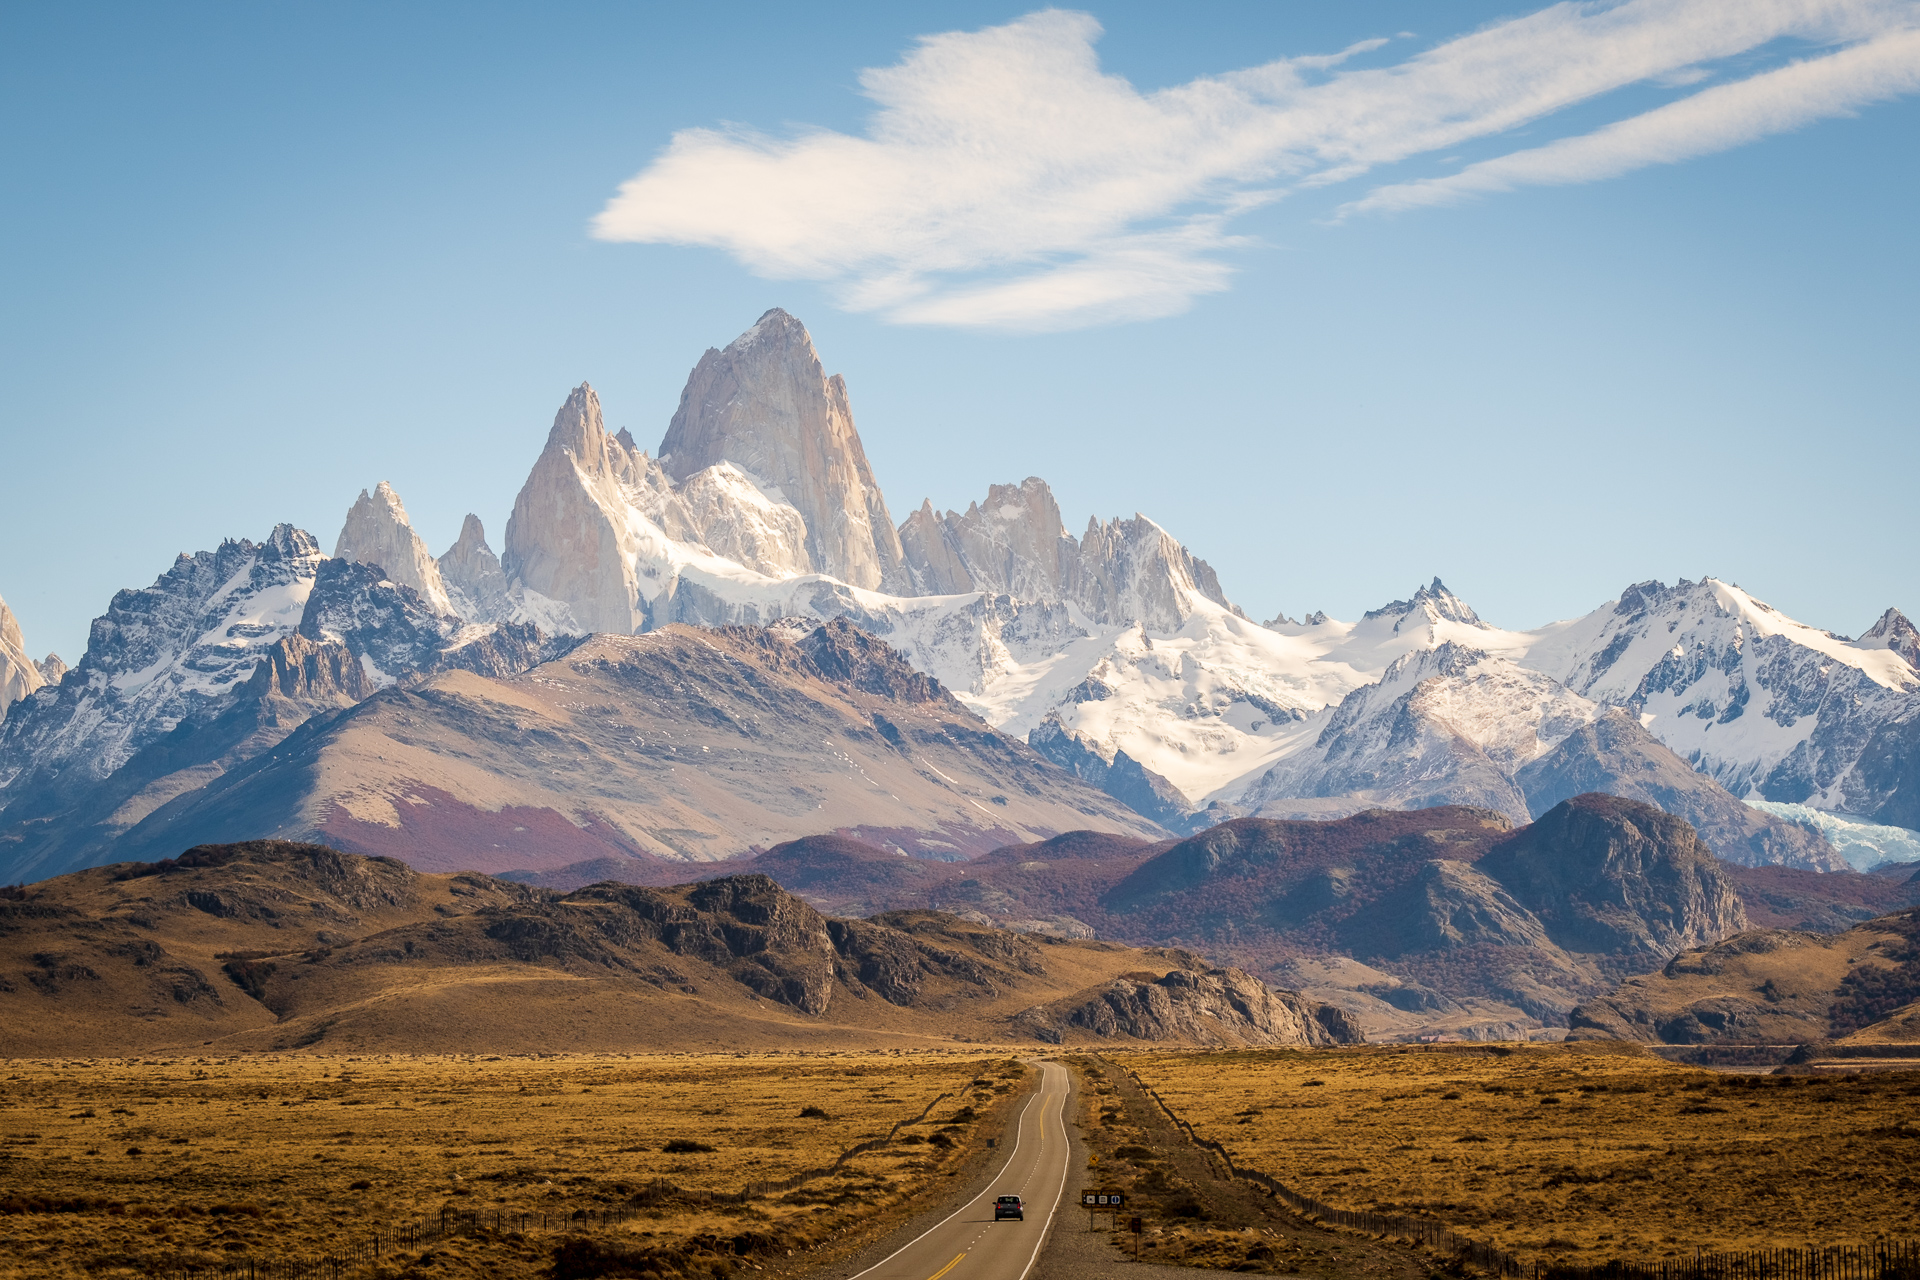 The whole Fitz Roy mountain Range is visible from afar.